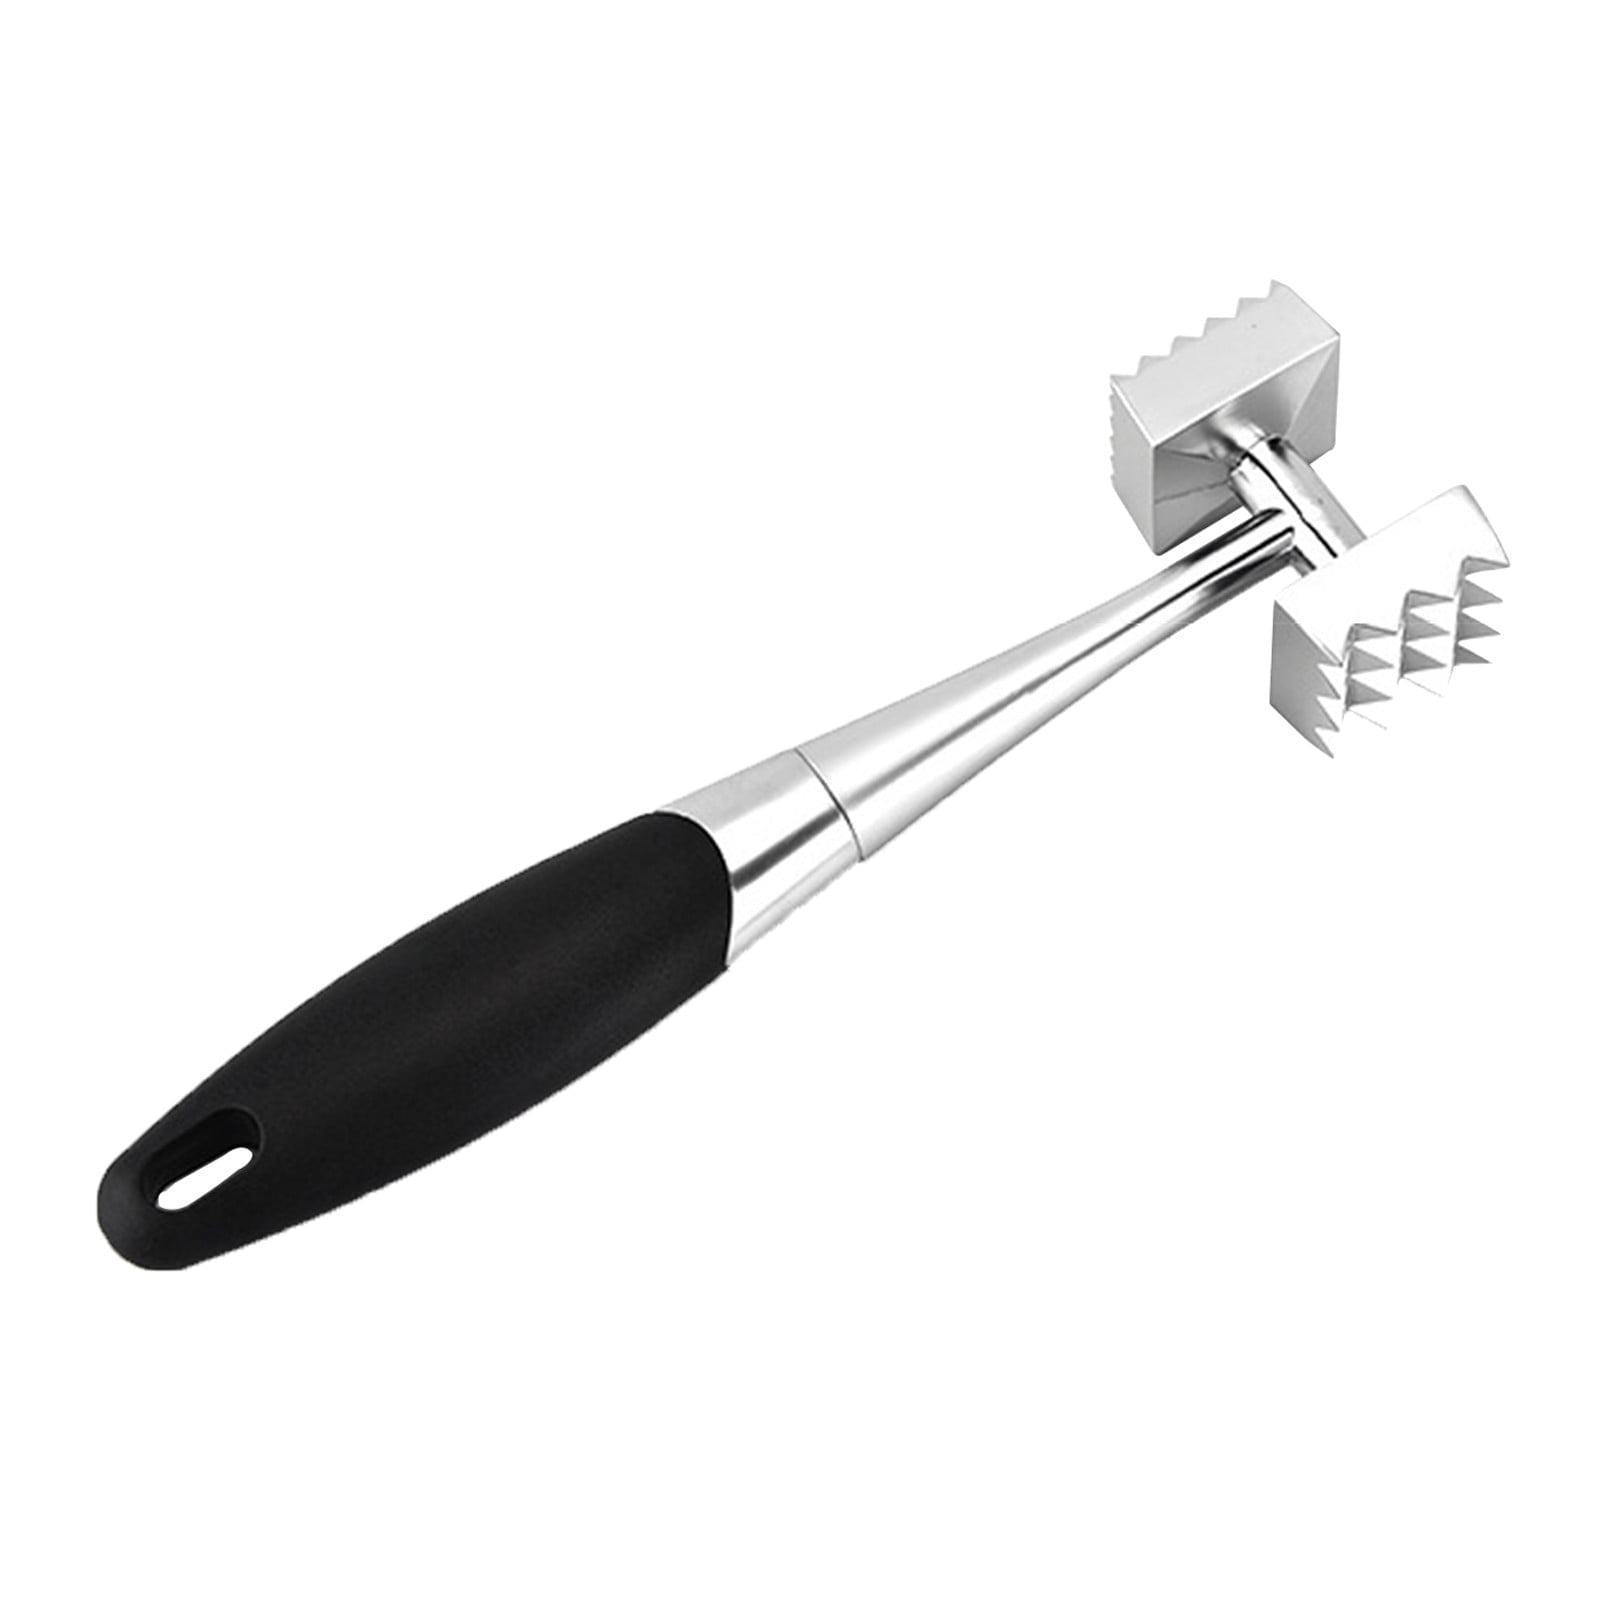 Vankcp Professional Meat Tenderizer Tool Poultry Tenderizers with 28  Stainless Steel Blades Meat Mallet for Beef,Pork,Chicken